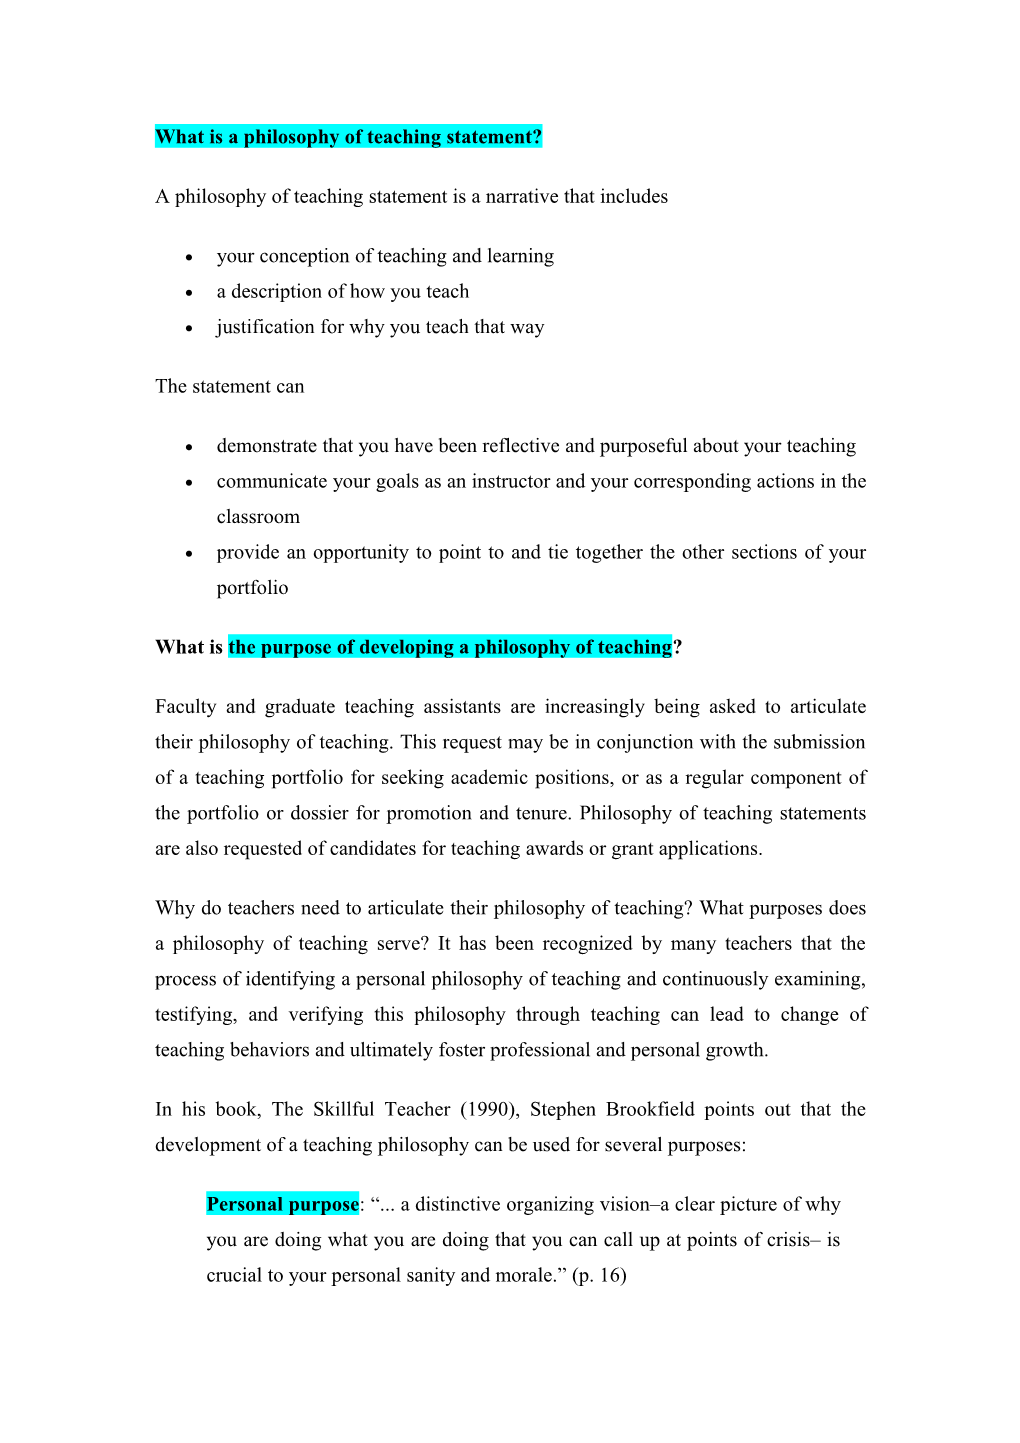 What Is a Philosophy of Teaching Statement